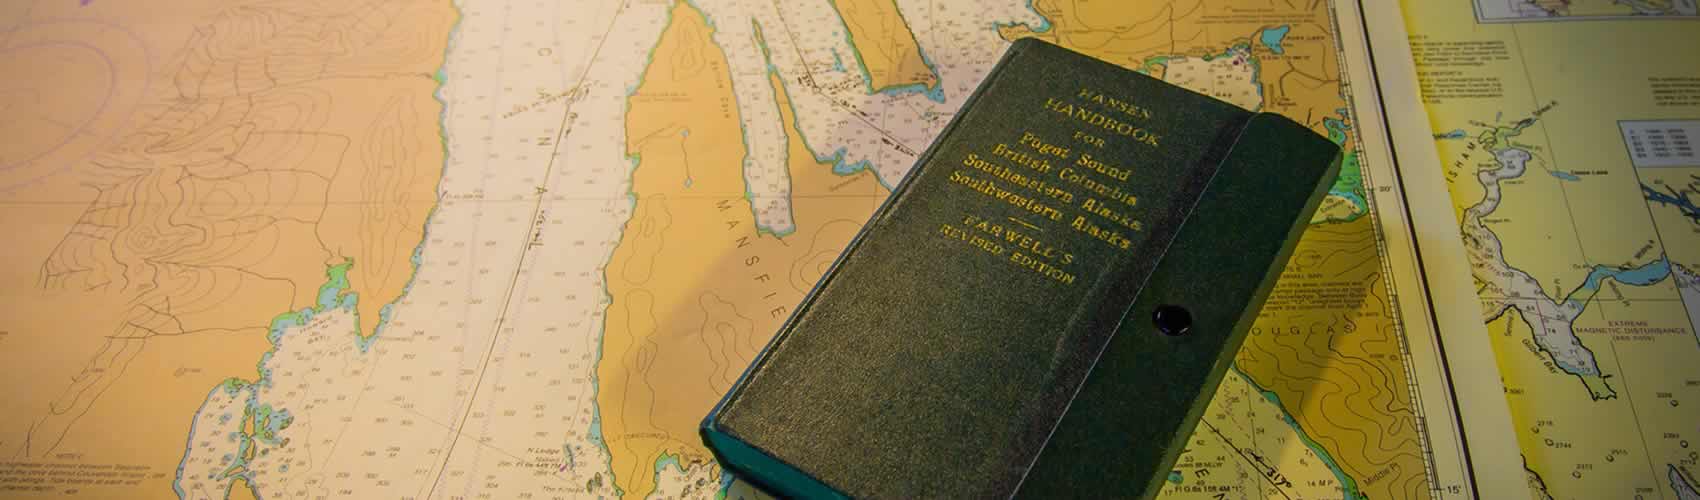 Marine book on a map